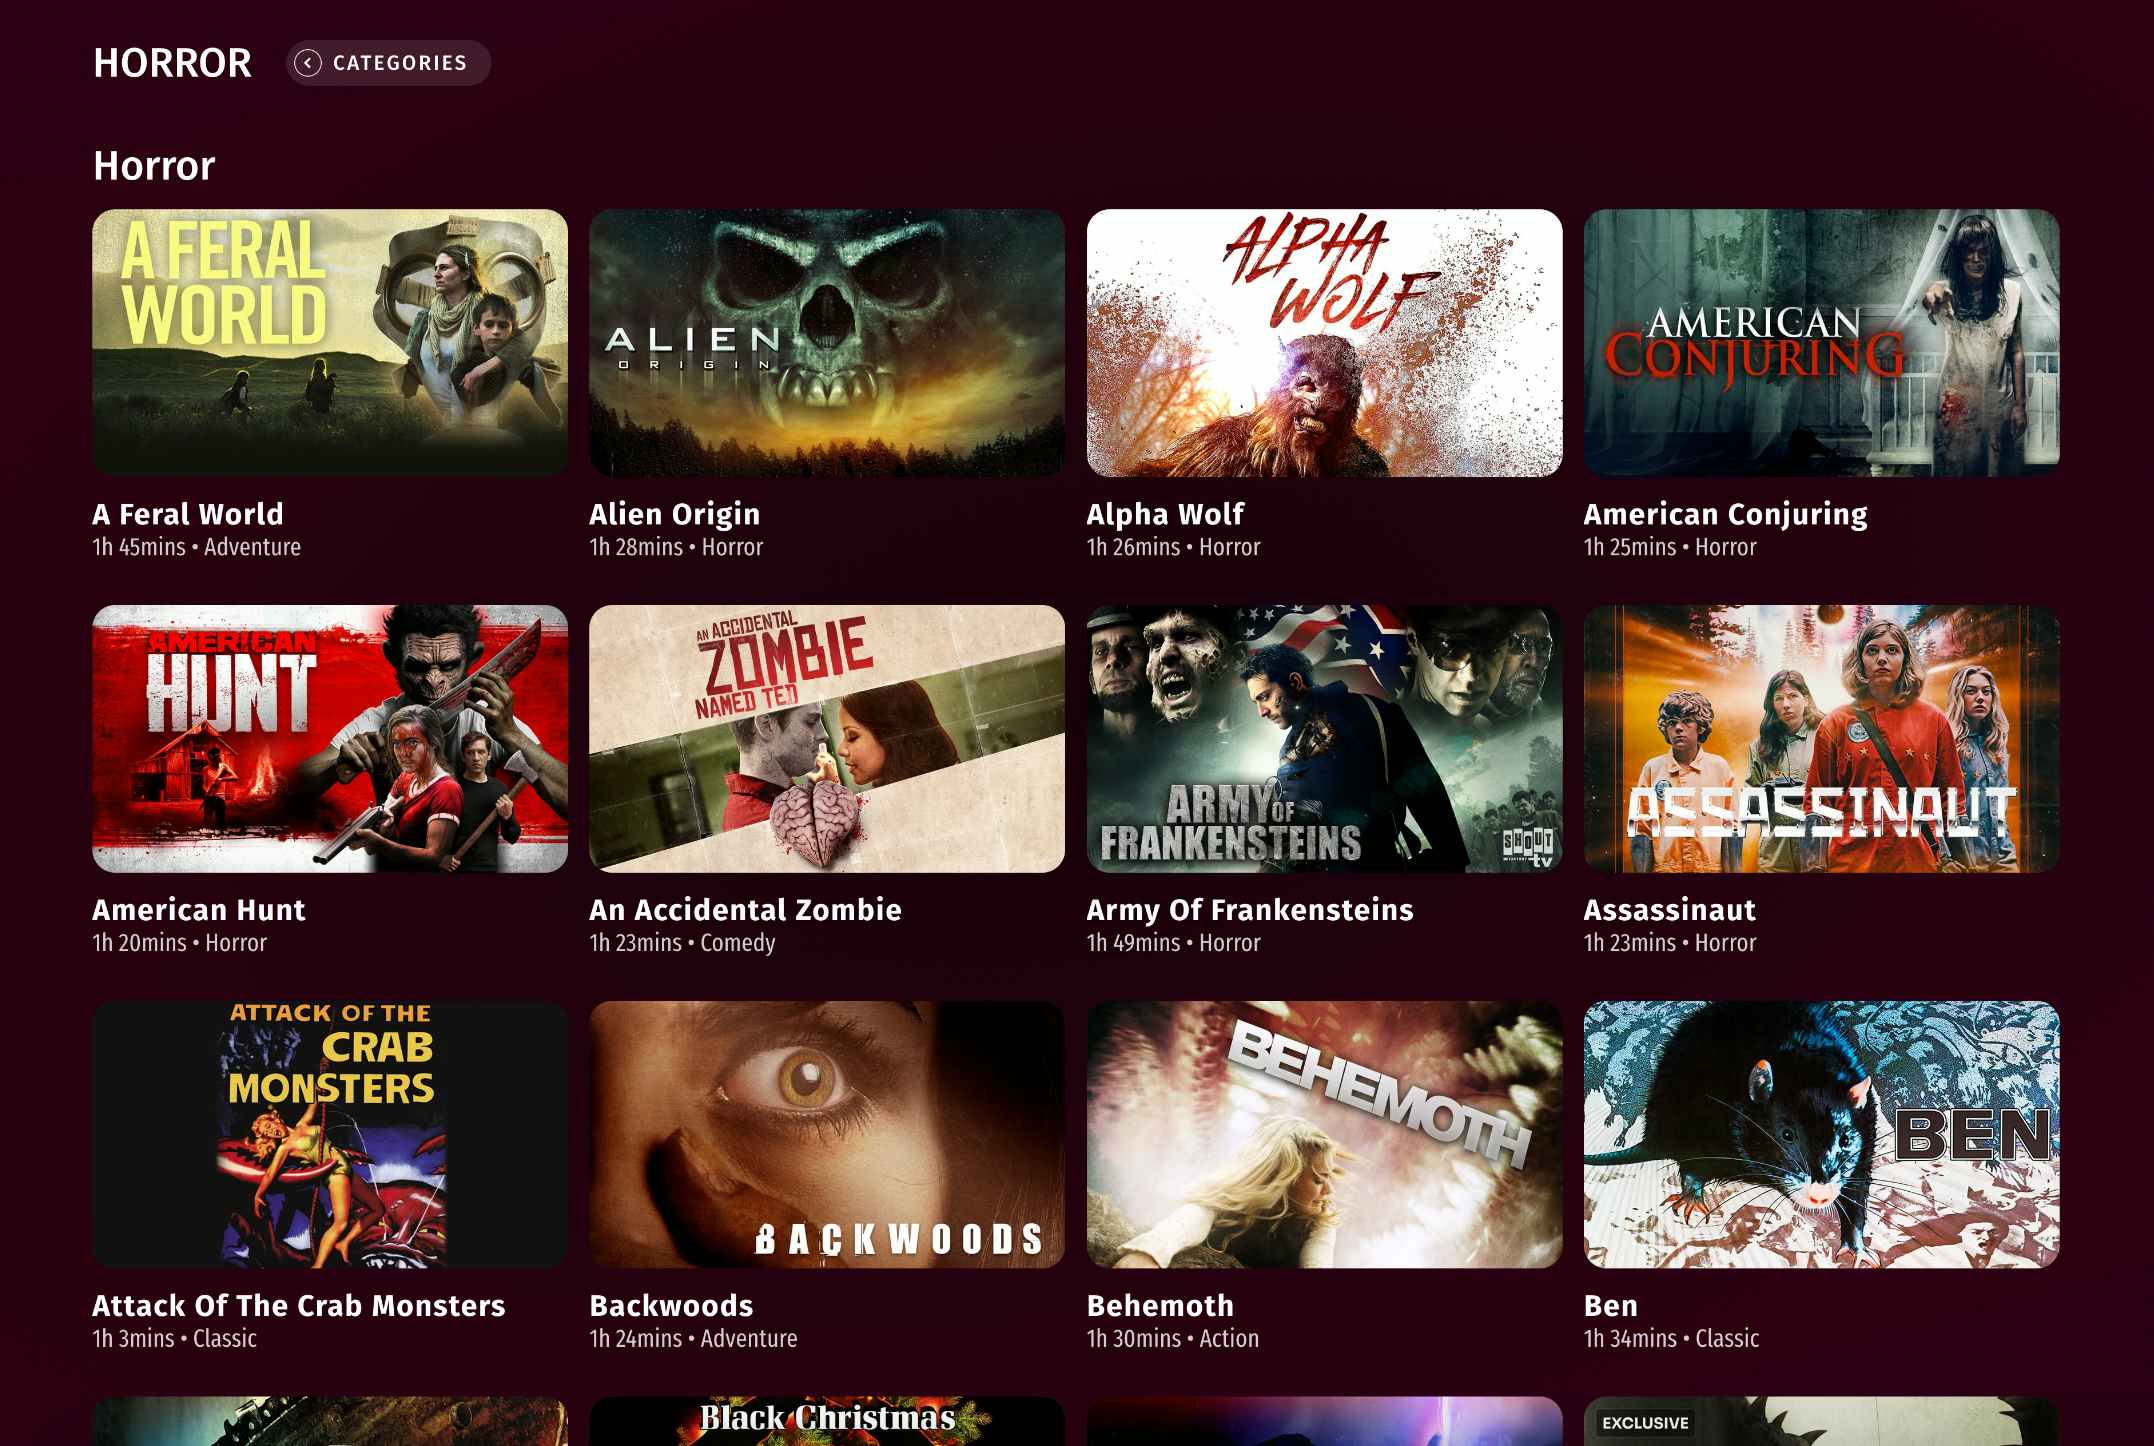 A screenshot from the Popcornflix website showing some of their horror movie selection.